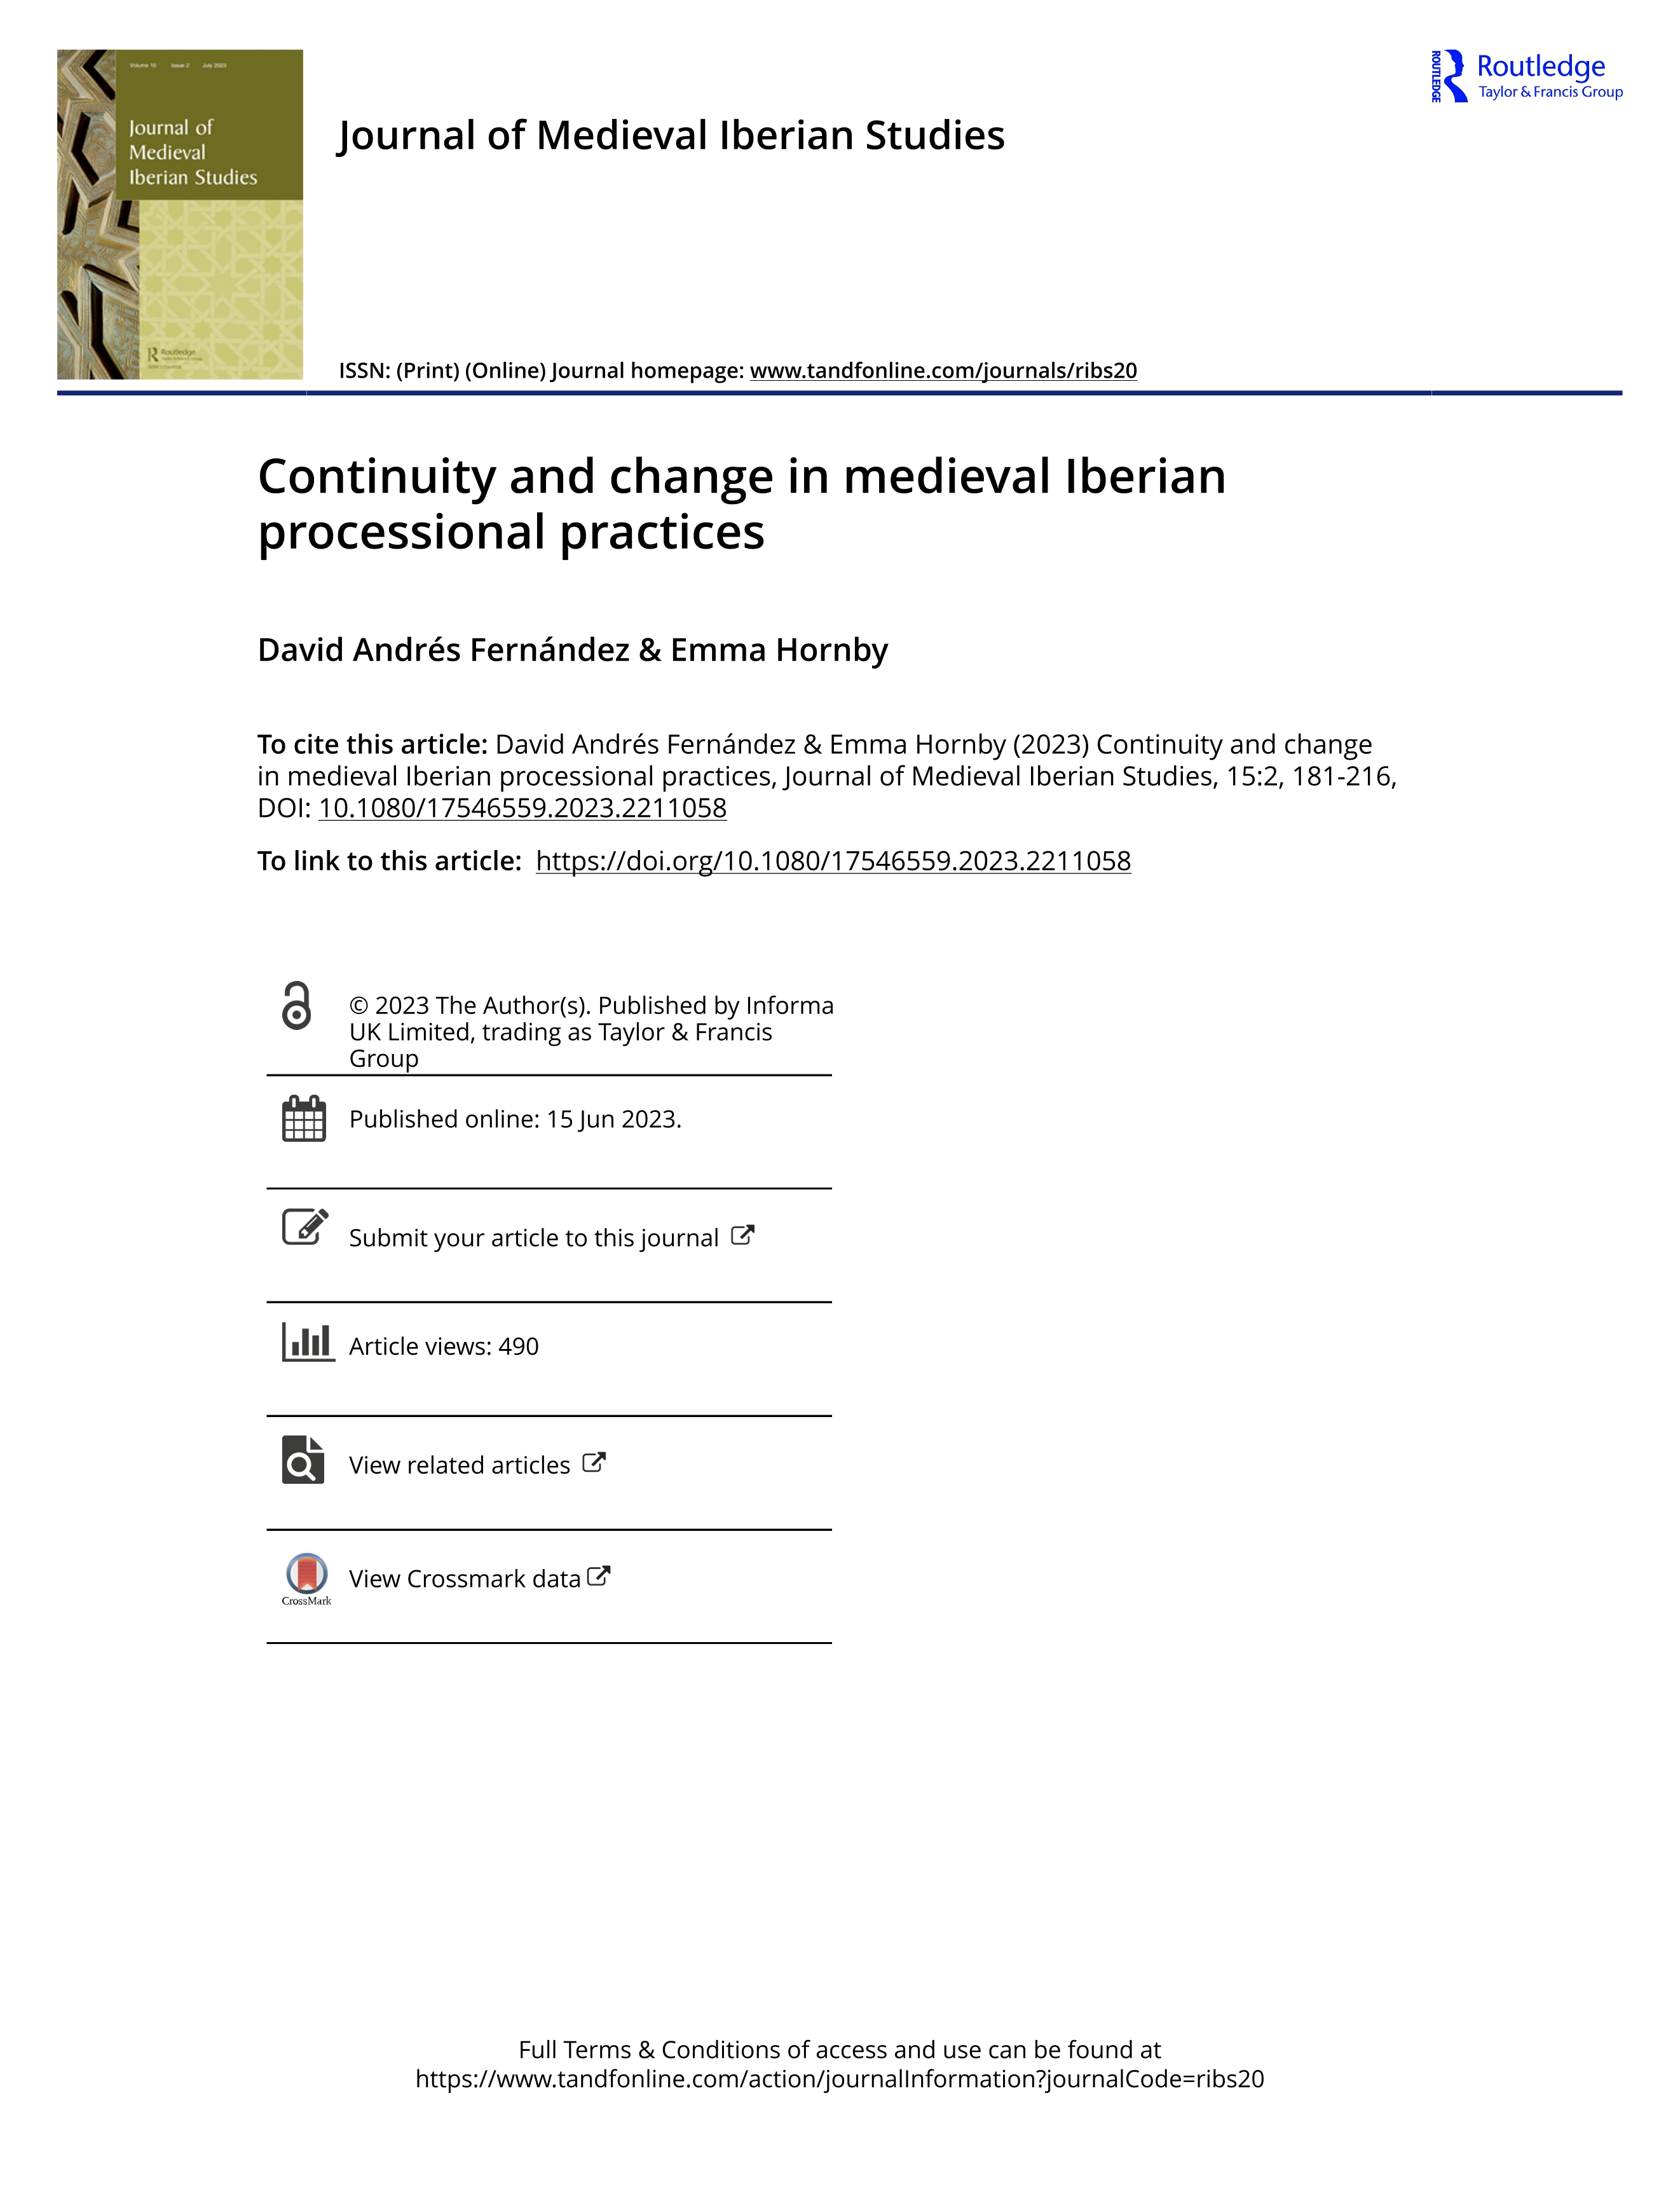 Continuity and change in medieval Iberian processional practices